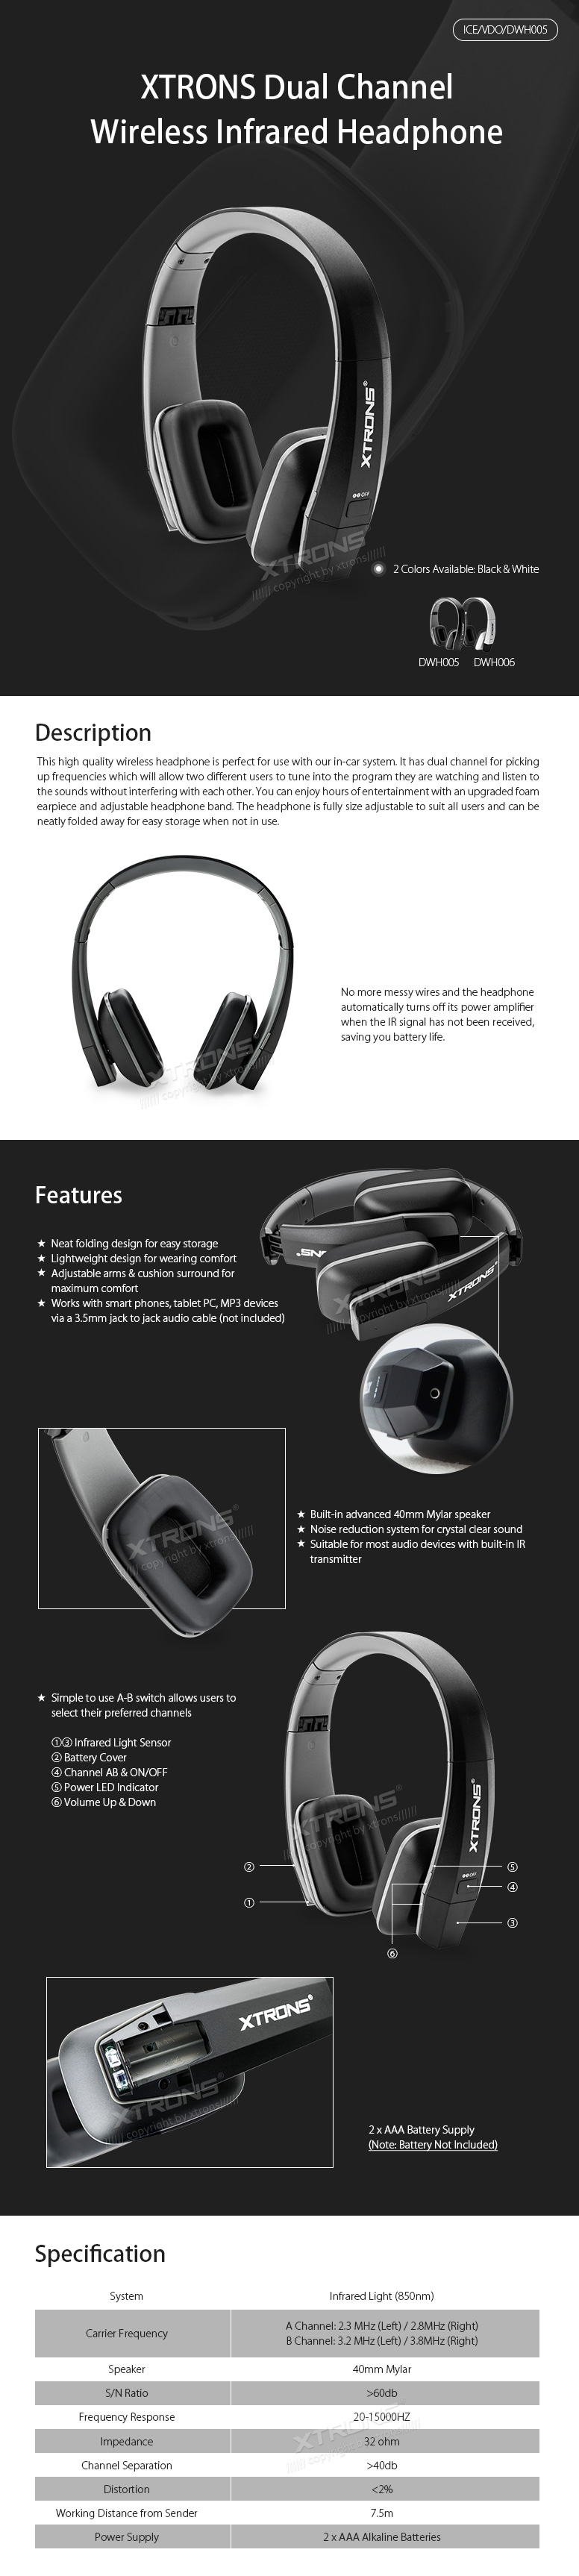 Wireless IR Infrared Headphones for Headrest Players and Overhead Monitors Xtrons DWH005